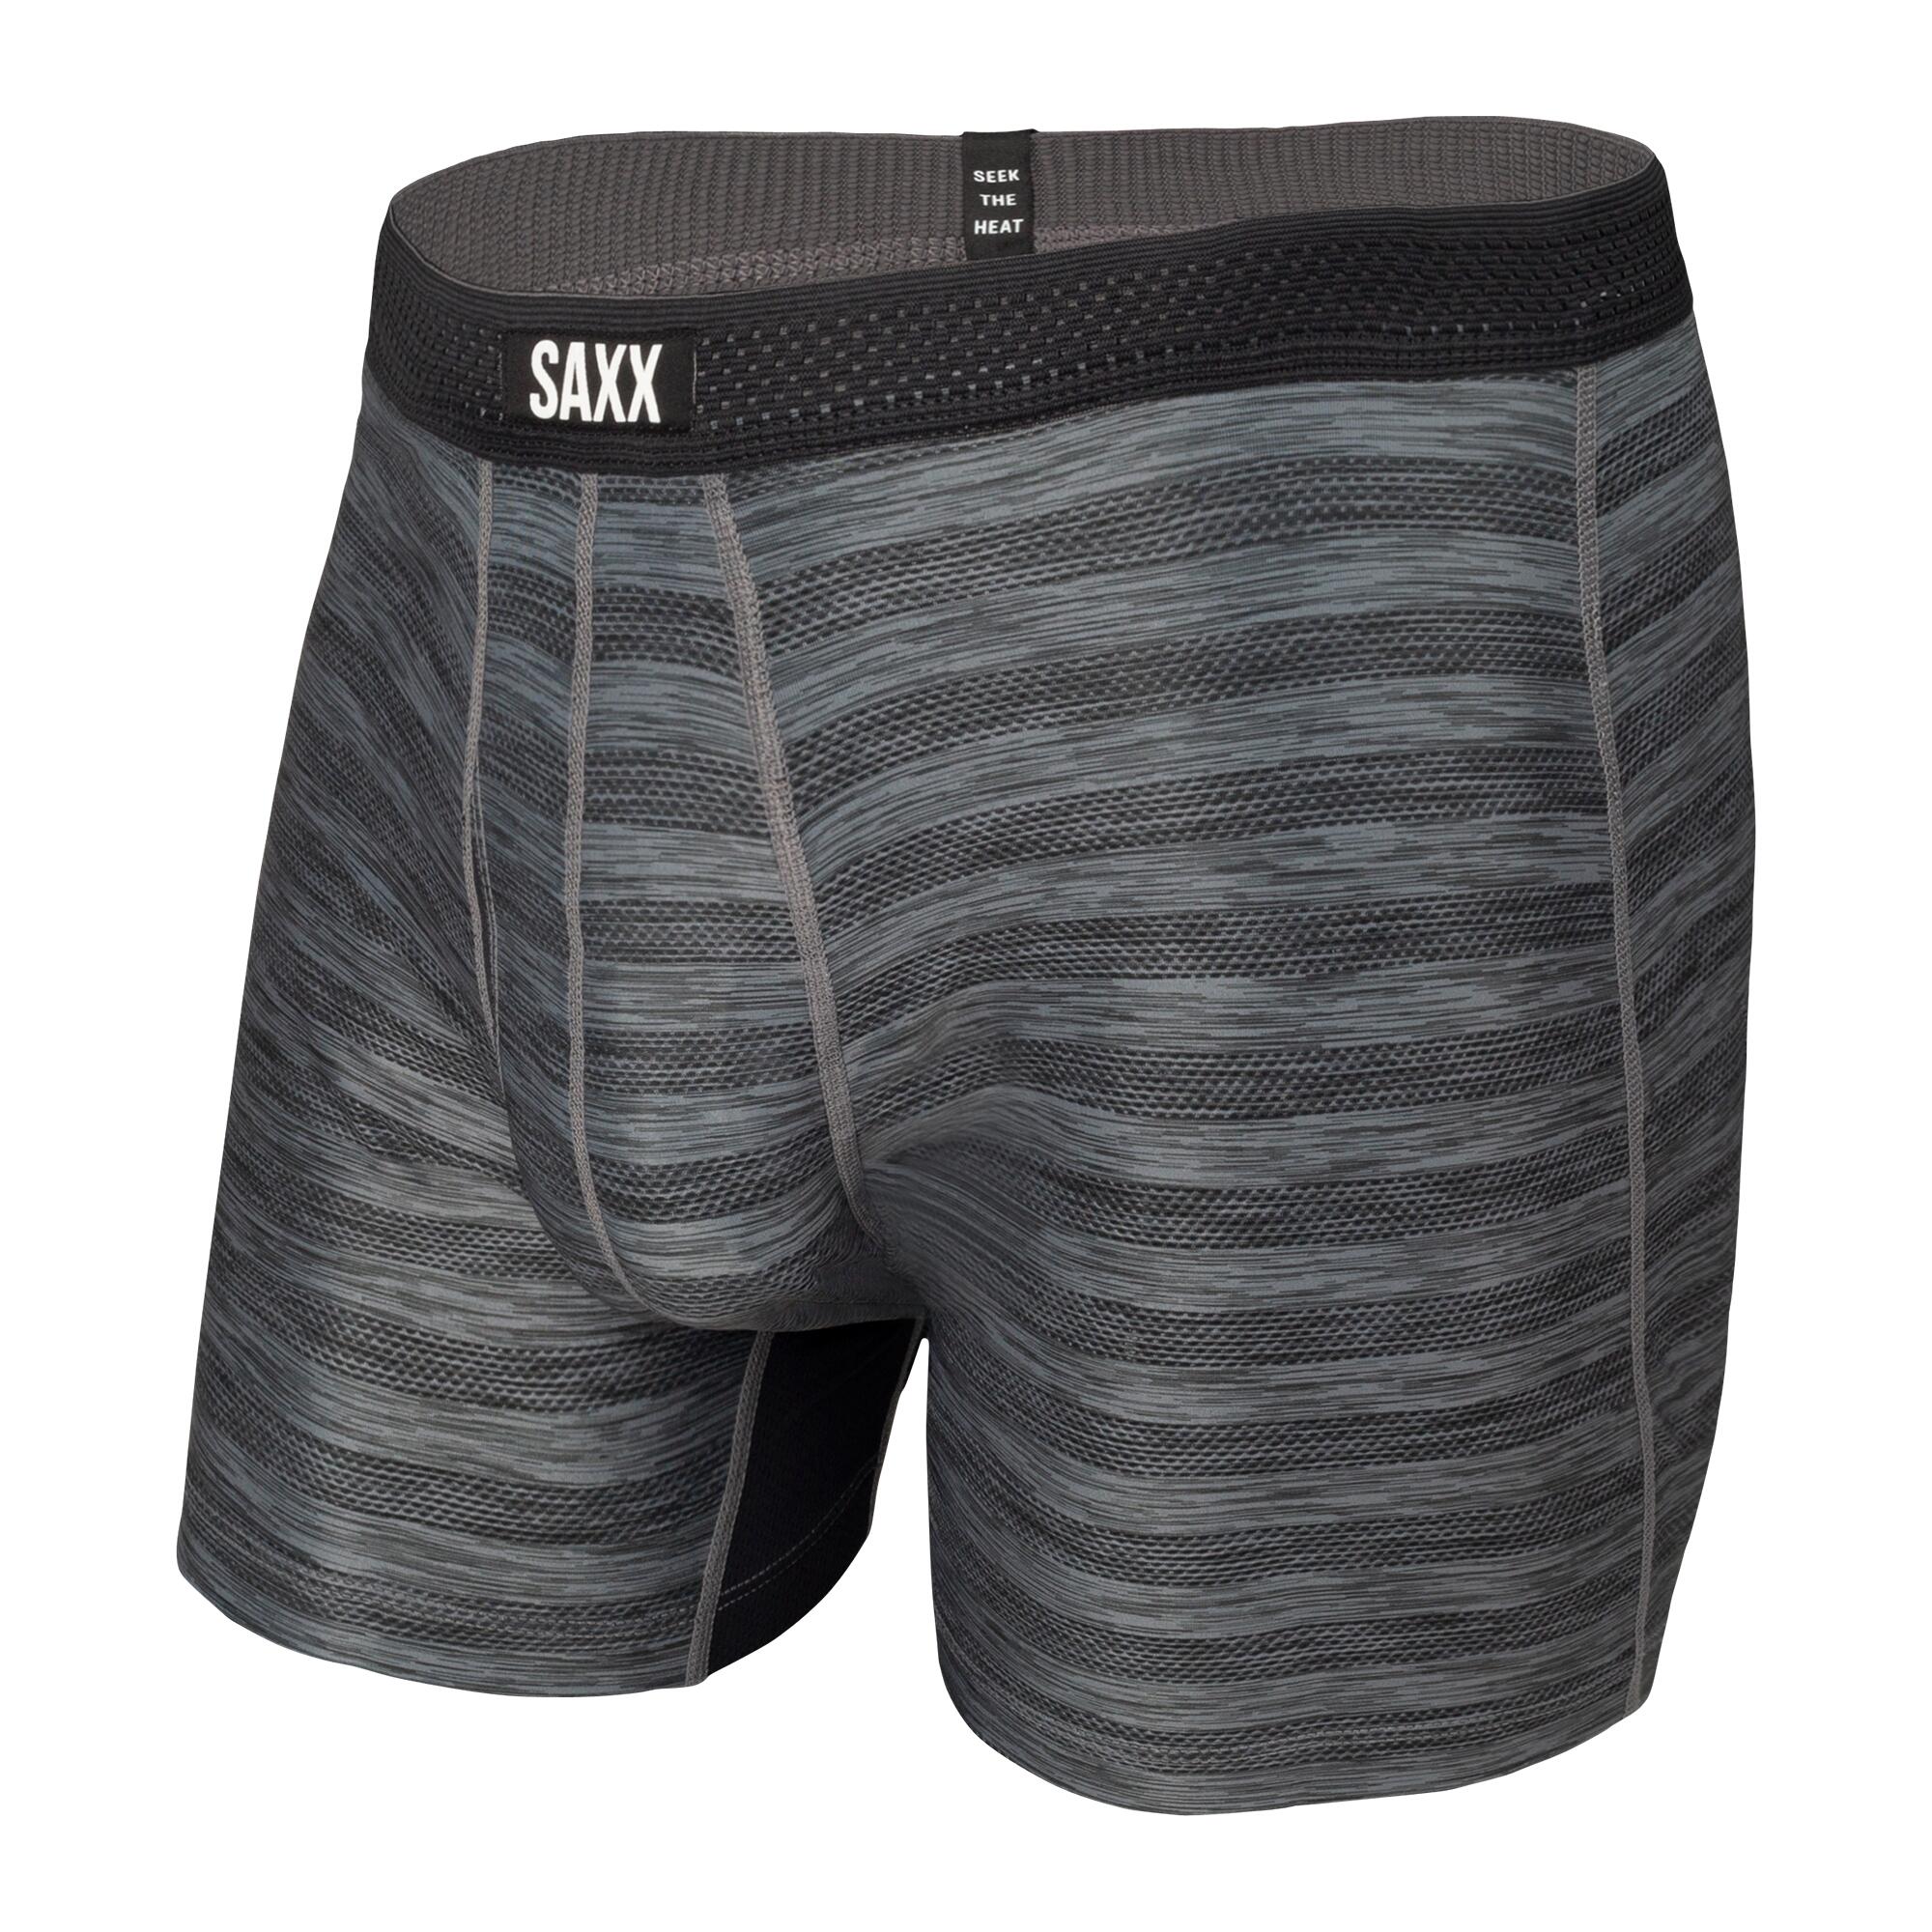 Men's quick-drying SAXX VIBE Boxer Briefs with hearts - gray. Grey